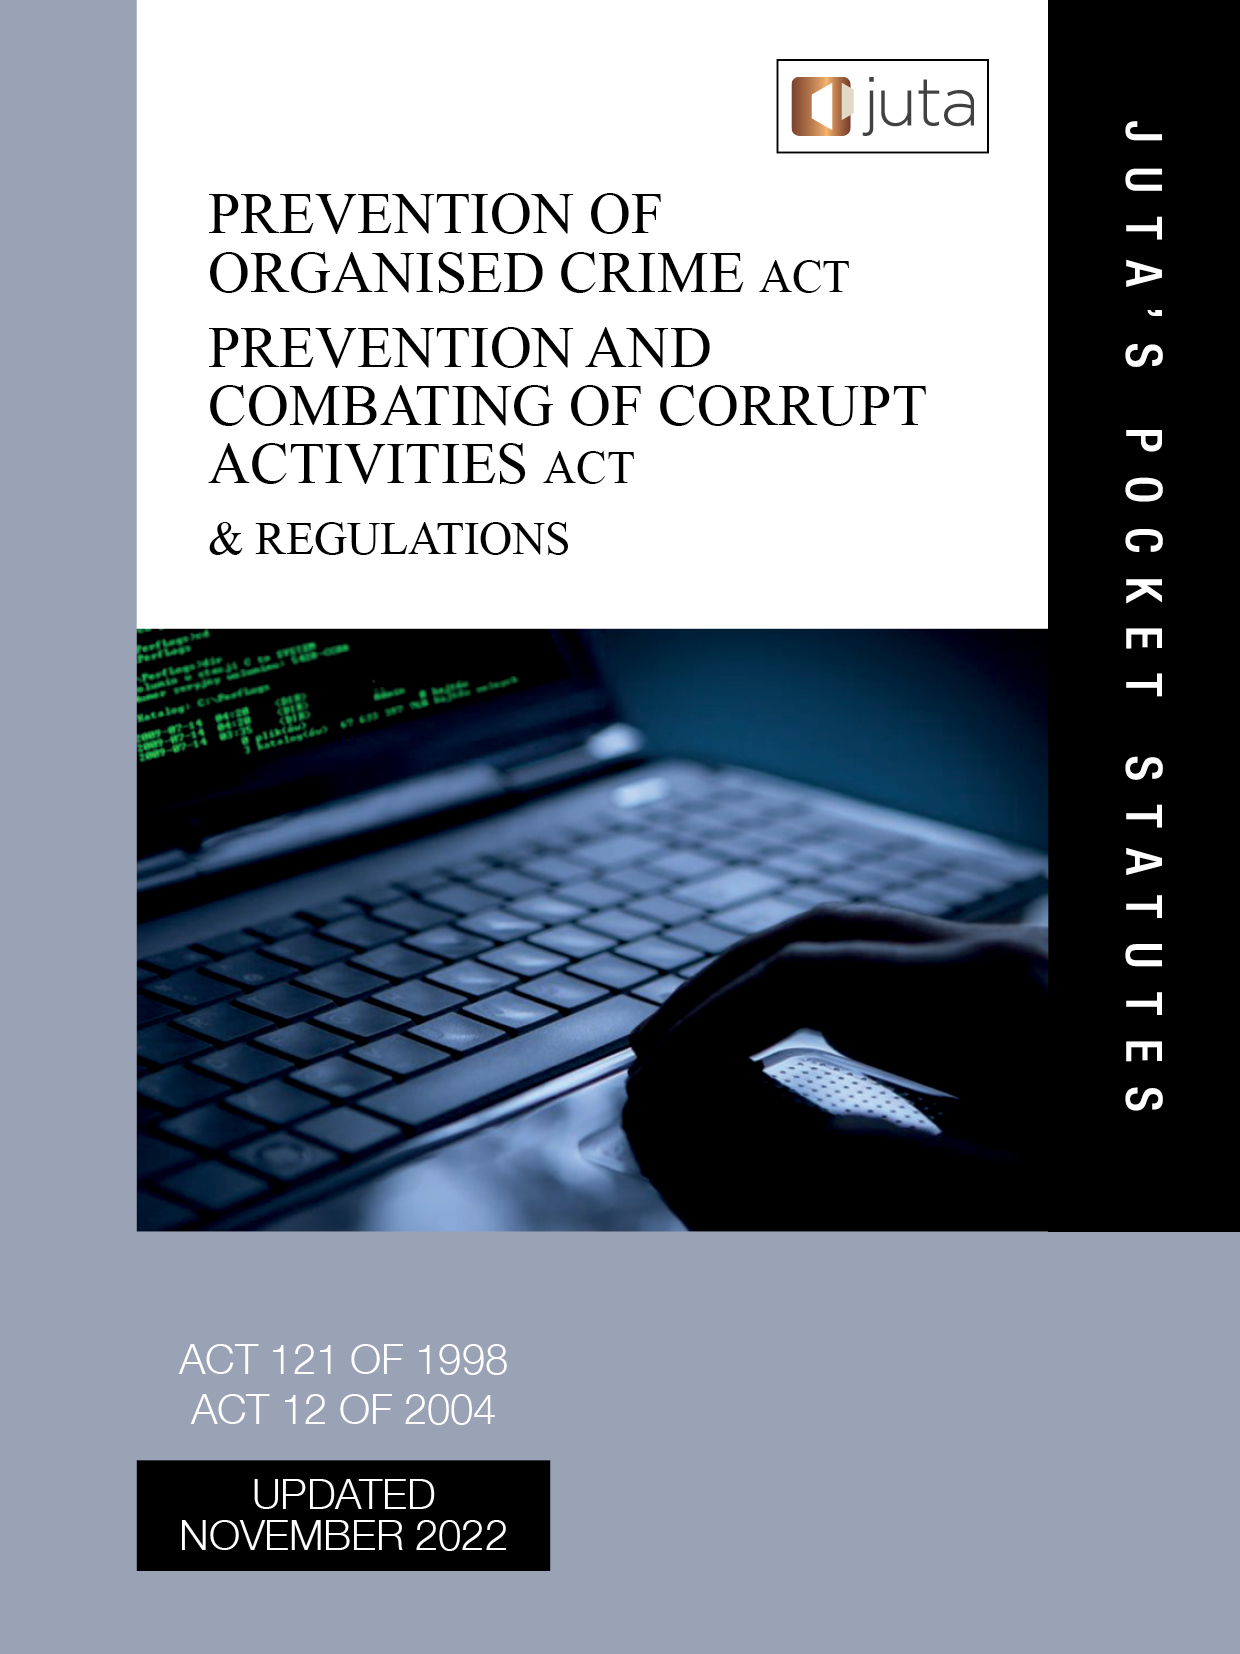 Prevention of Organised Crime Act 121 of 1998; Prevention and Combating of Corrupt Activities Act 12 of 2004 & Regulations